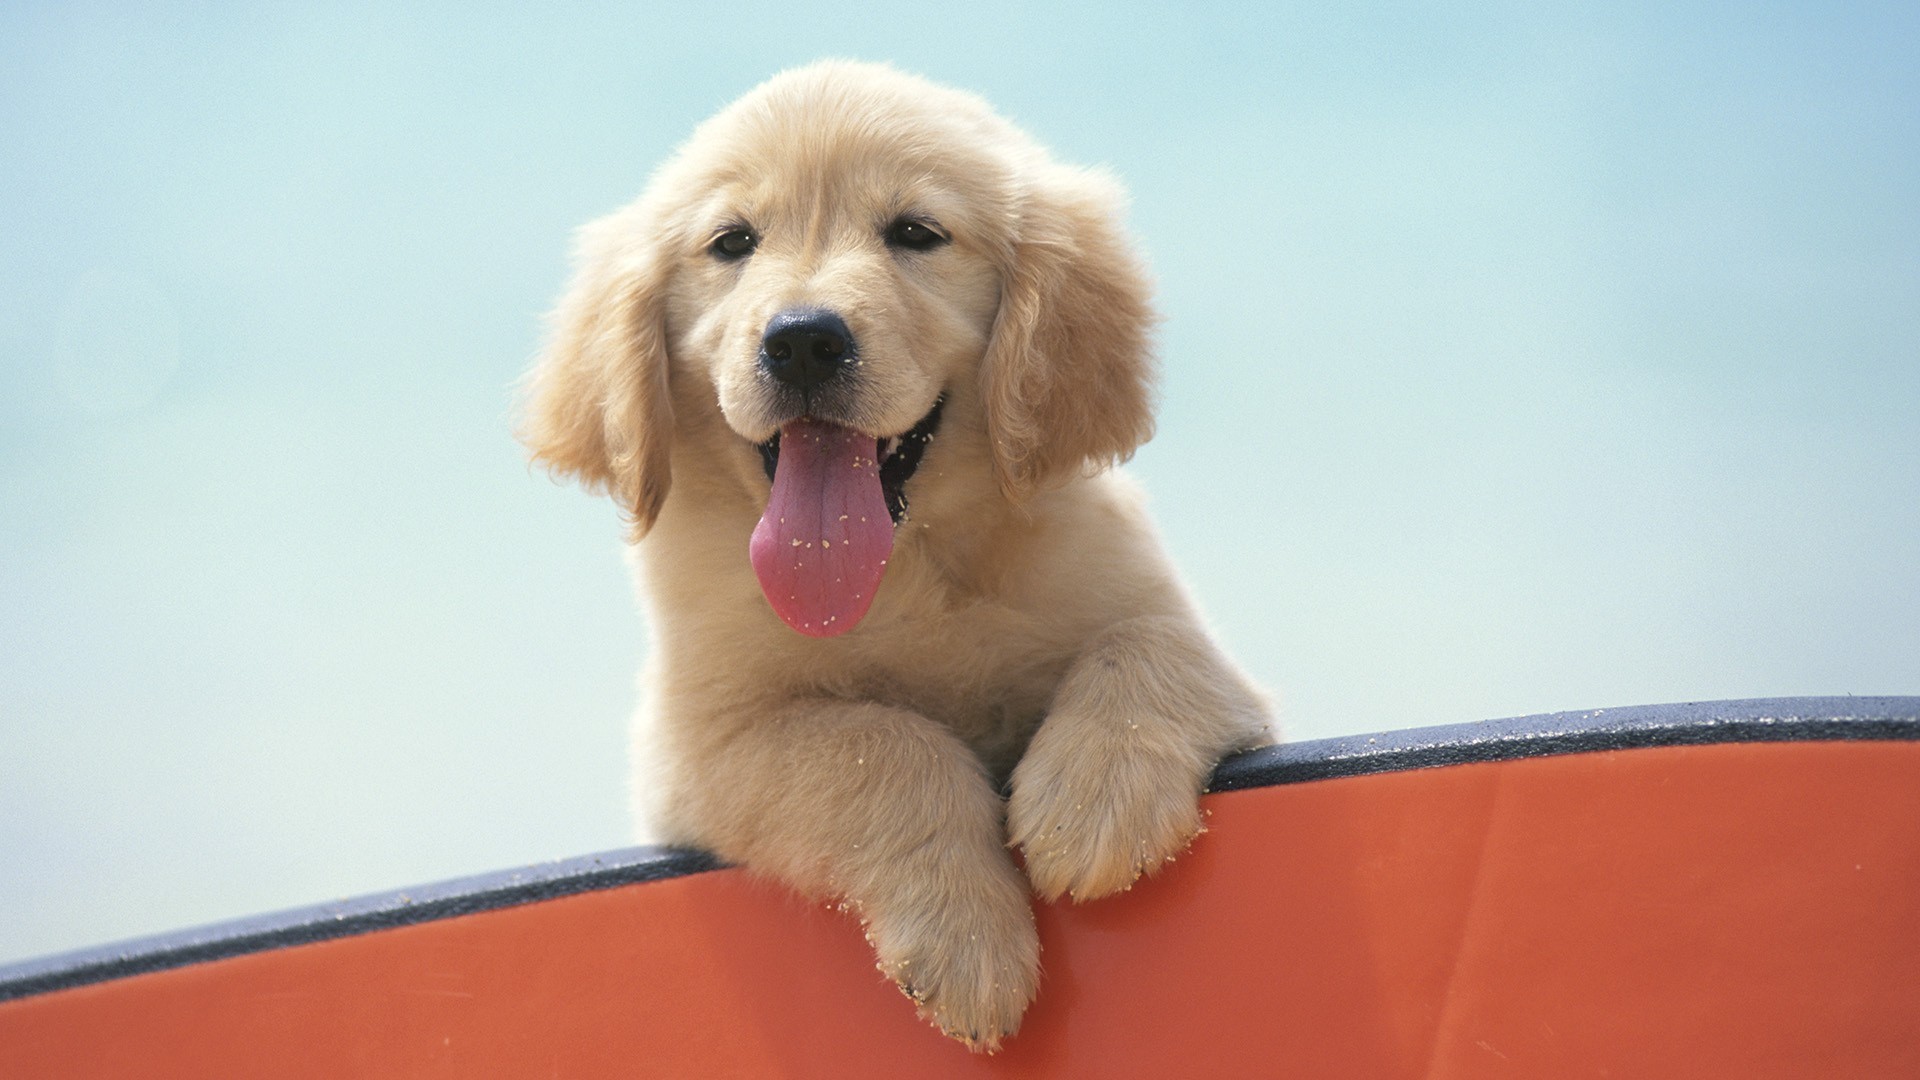 Puppy Sticking Its Tongue Out - HD Wallpaper 